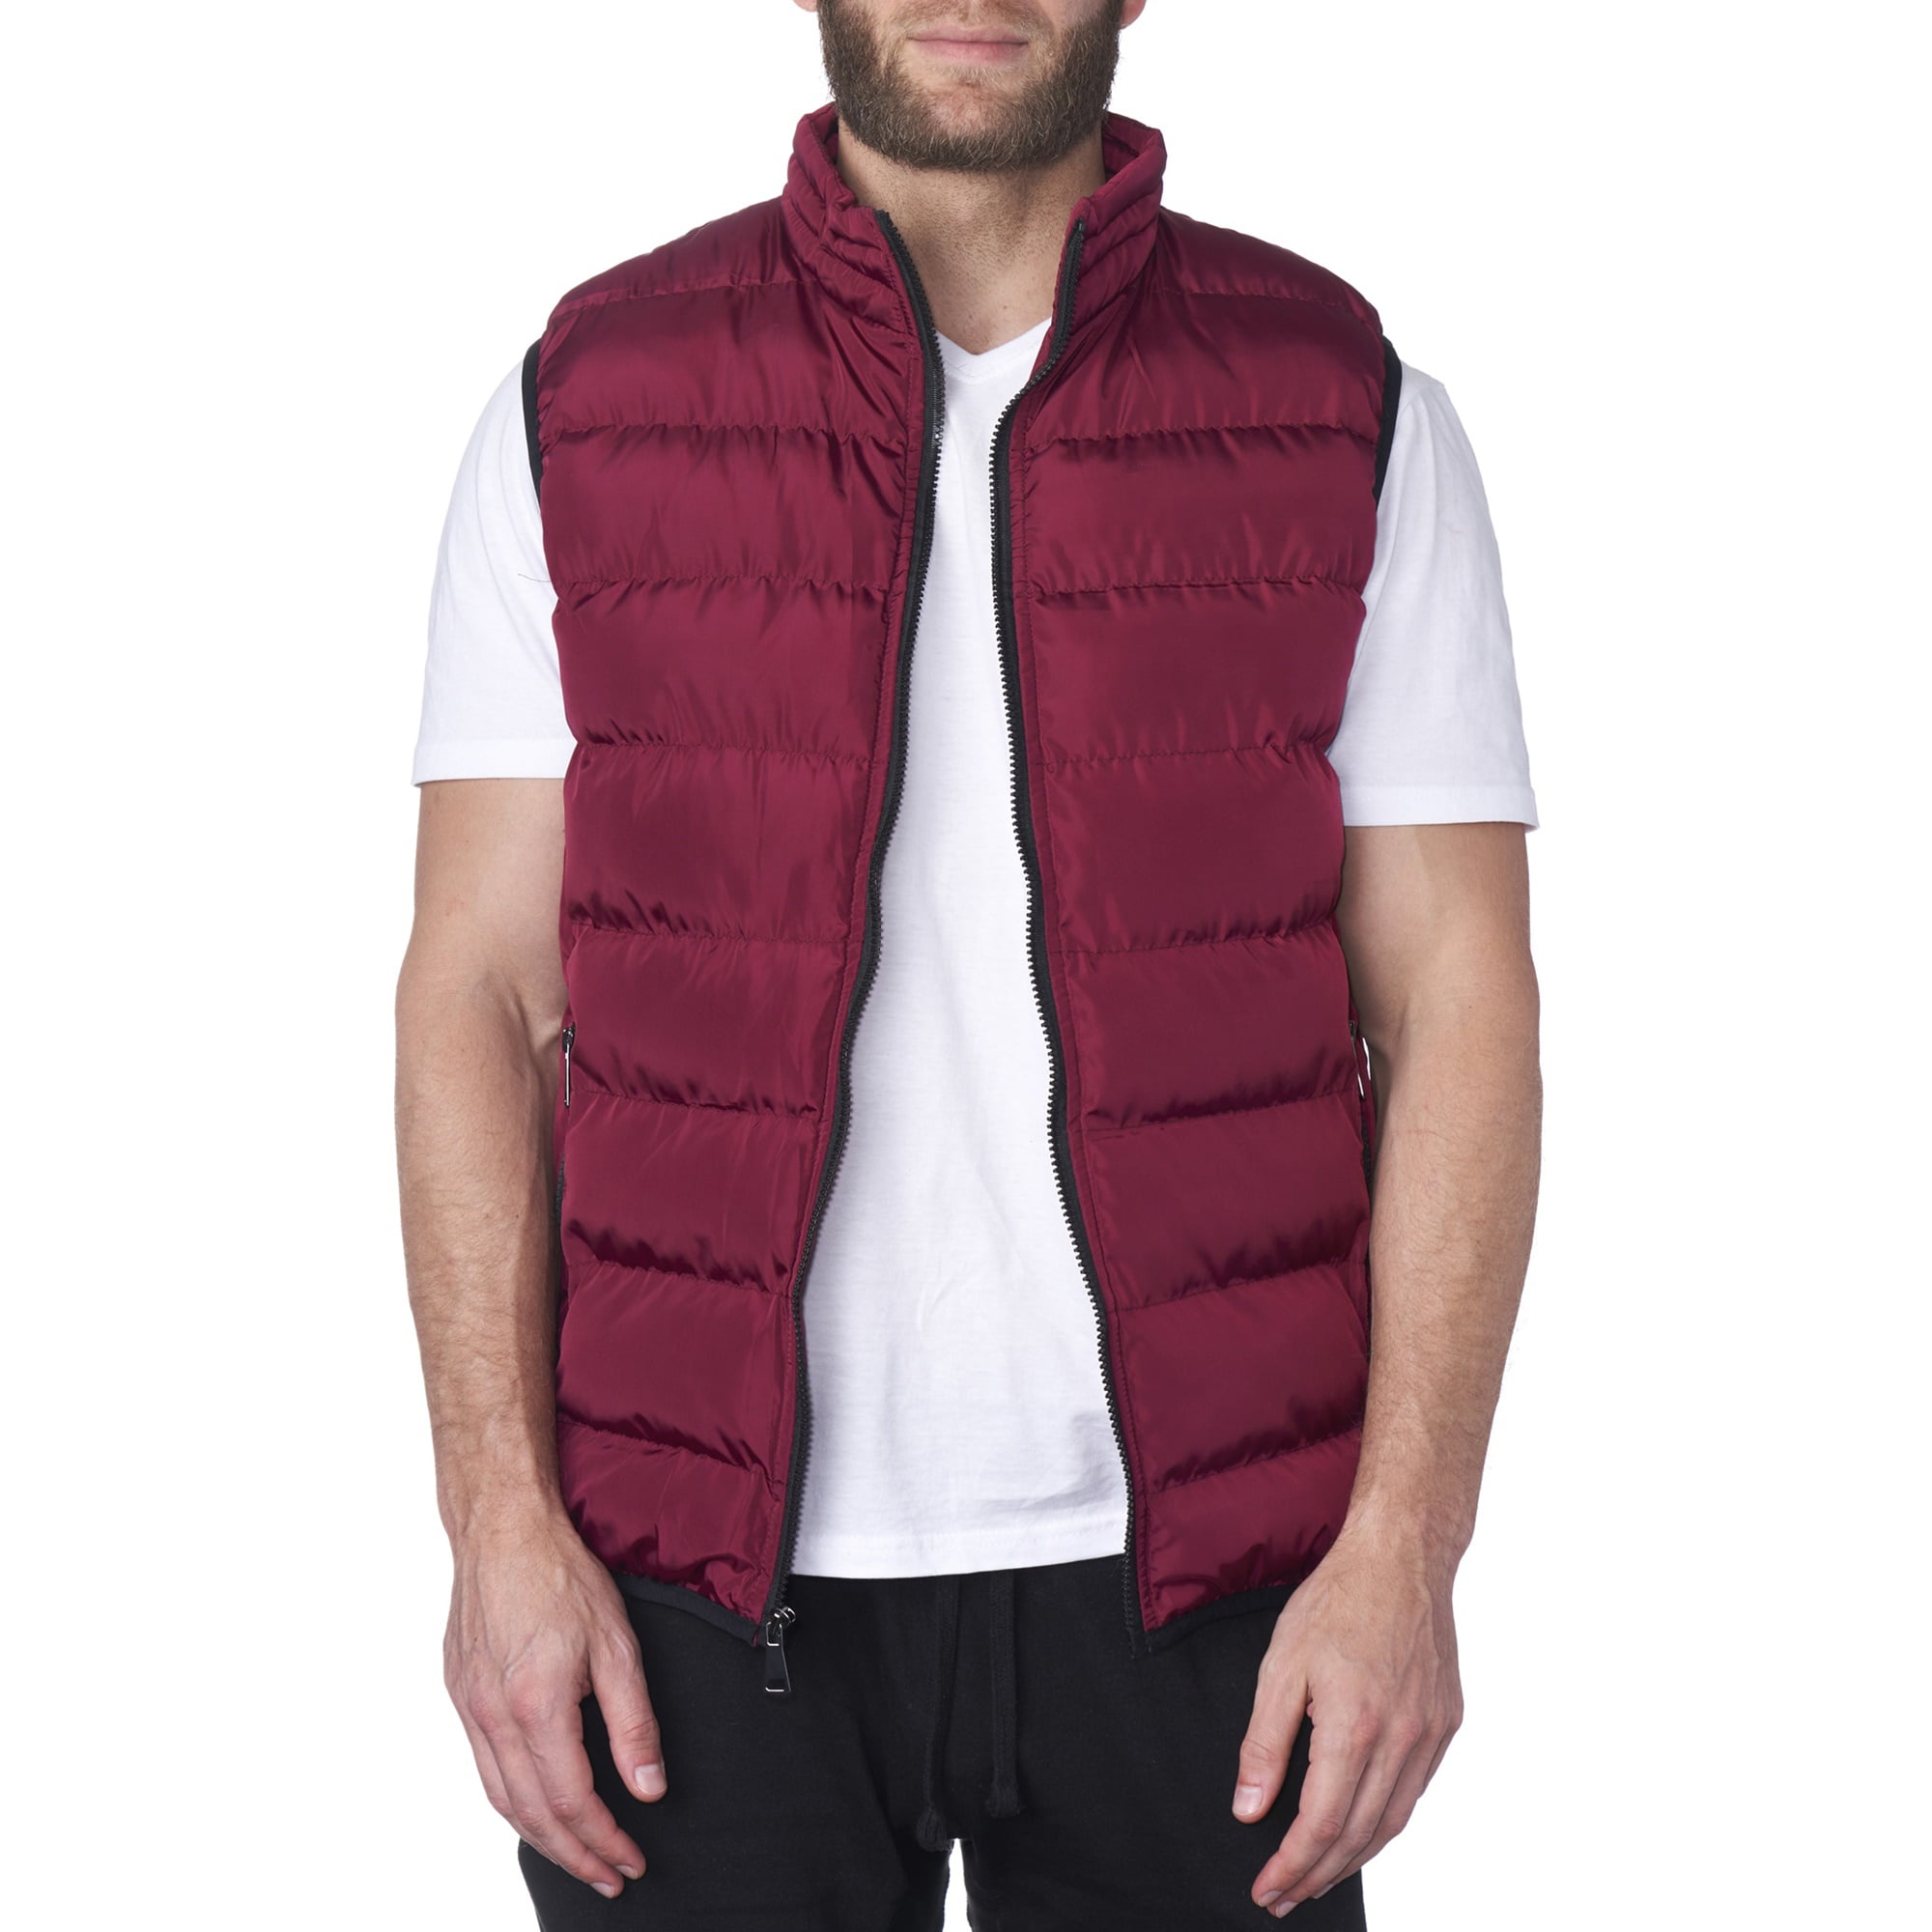 Mens Lightweight Down Vest Jacket Polyester Stand Collar Quilted Outwear Winter Travel Sports Active Sleeveless Puffer Vests 